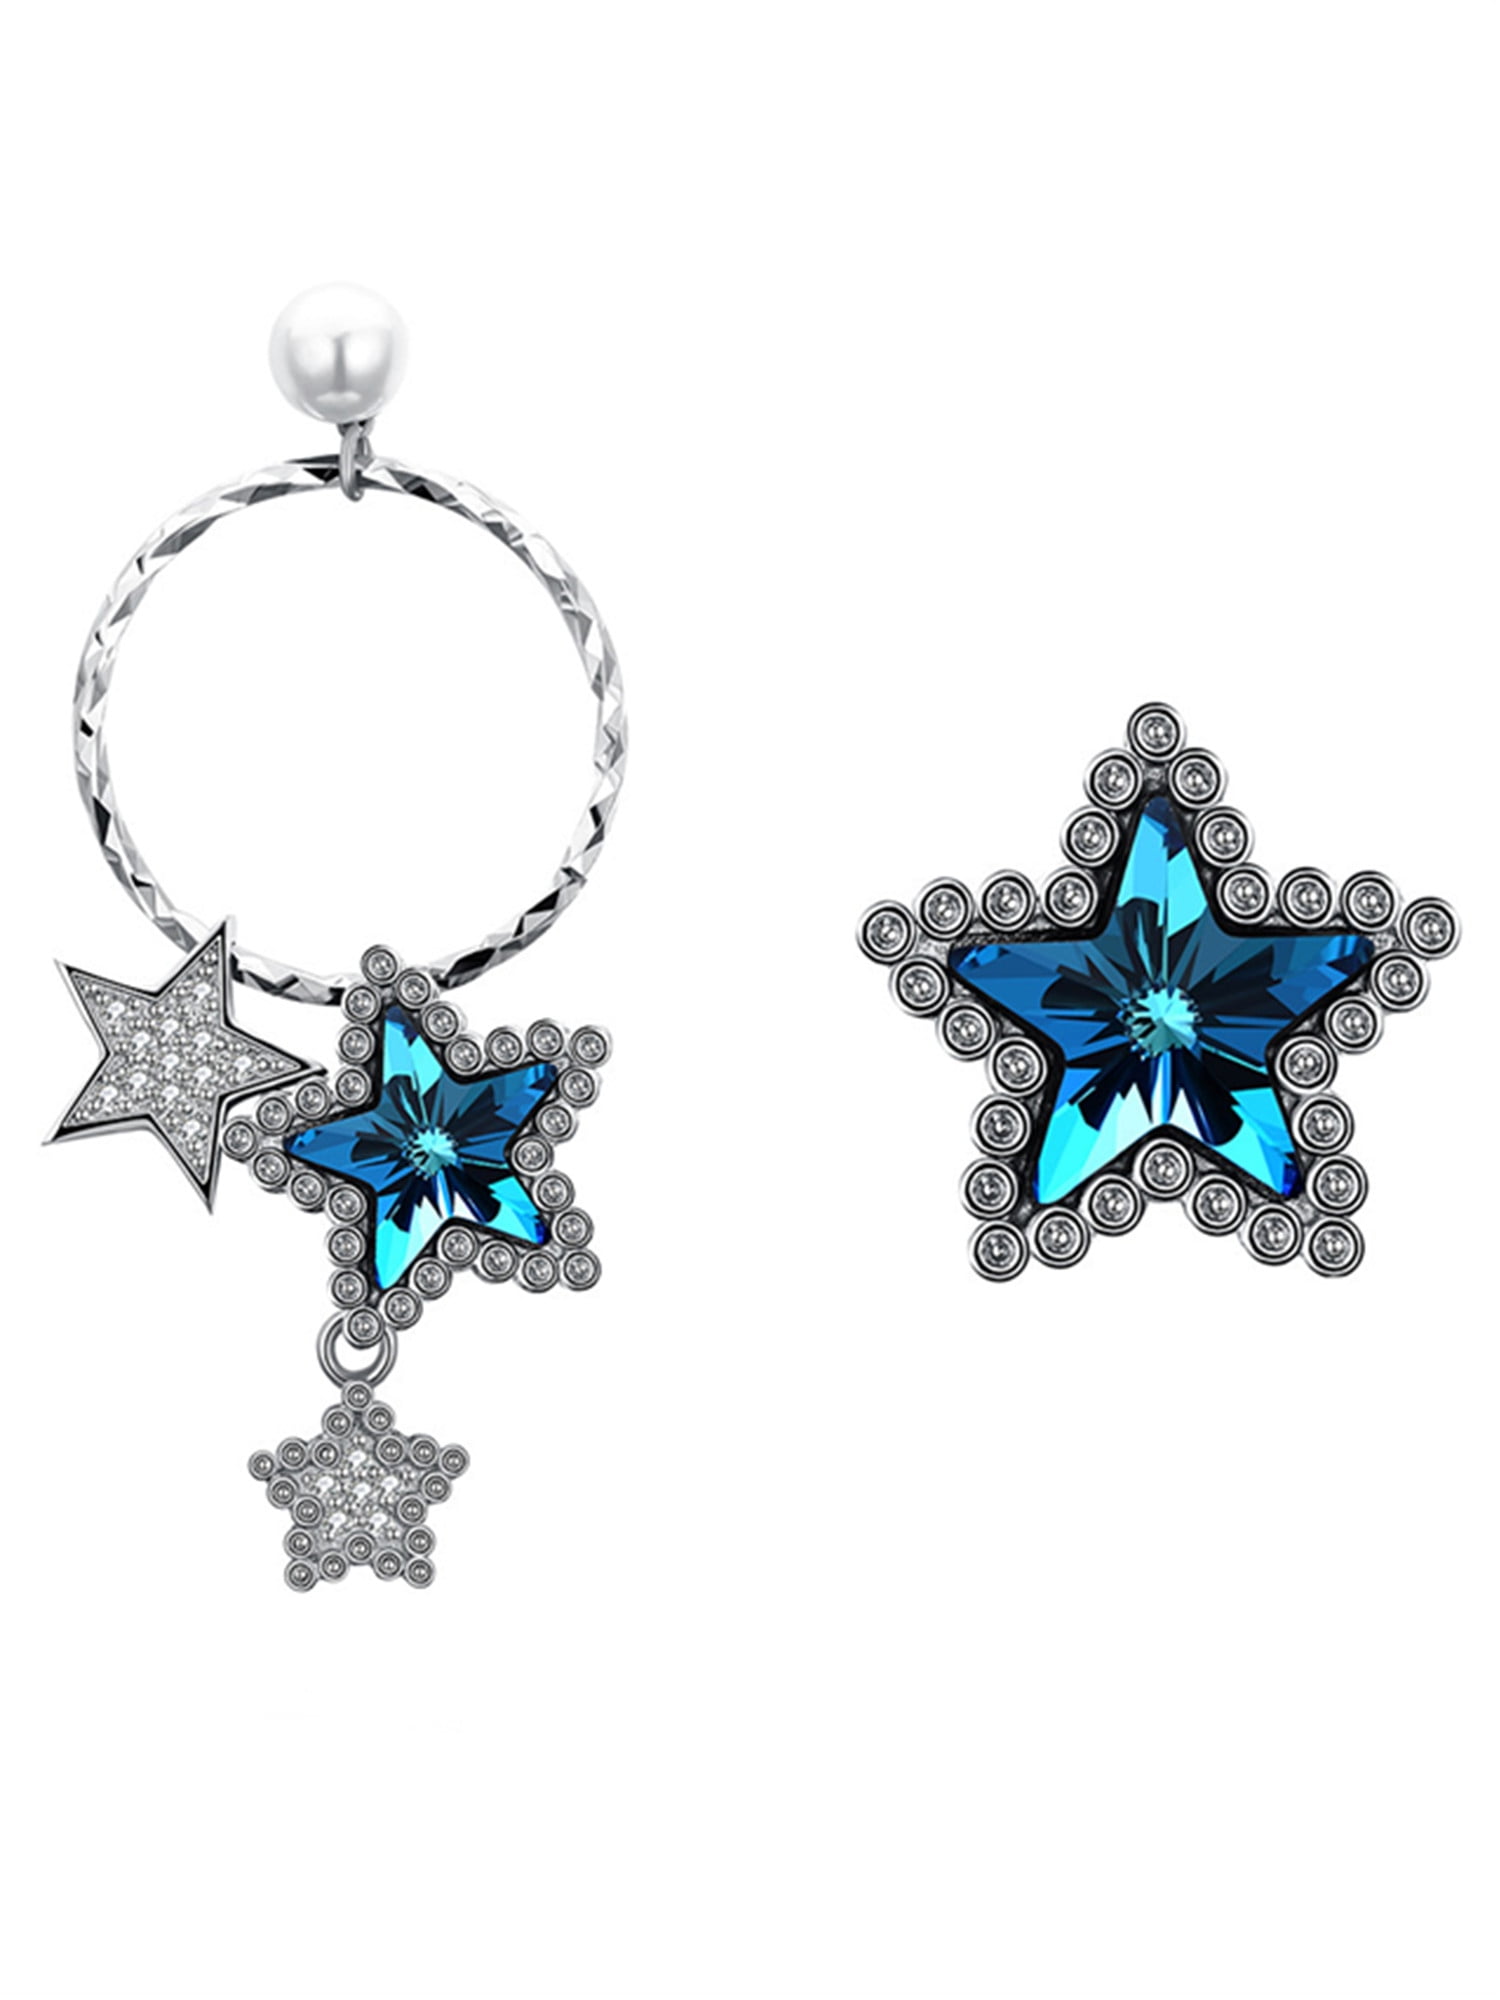 Devuggo Unique Multiple Stars Drop Pendant Stud Earrings with Austria Crystals ,Mother's Day Sterling Silver Jewelry Gifts for Women Sensitive Ear Skin